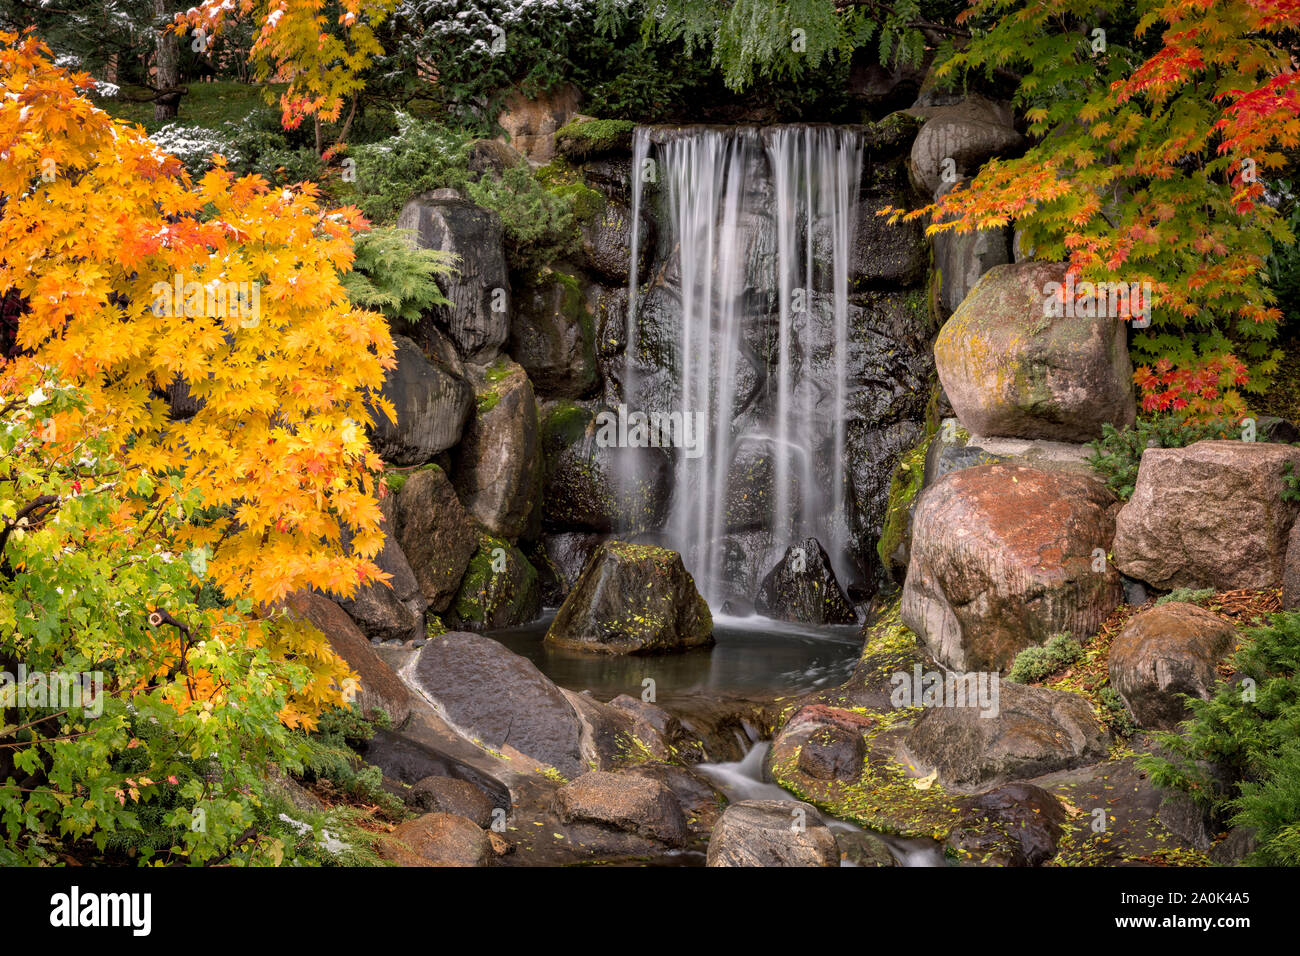 Autumn leaves and waterfall at the Japanese garden at Normandale Community College in Bloomington, Minnesota. Stock Photo